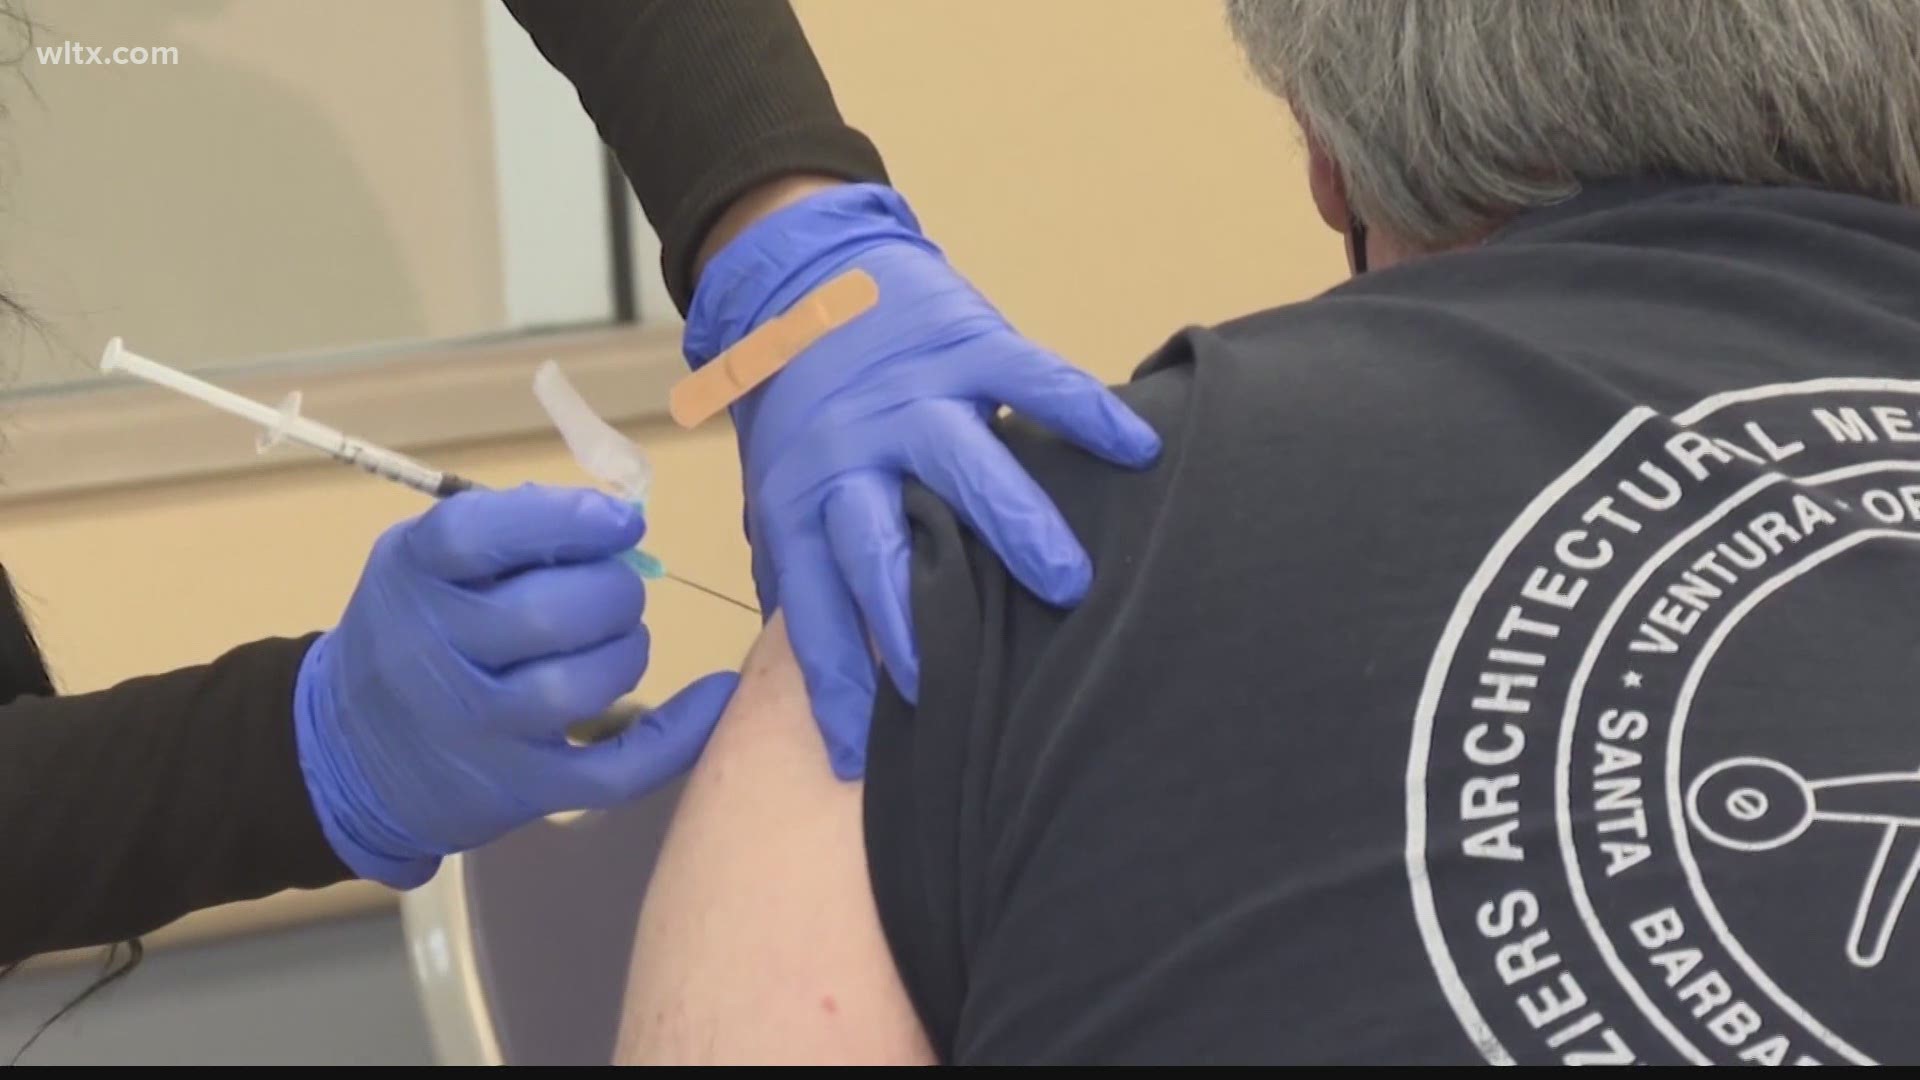 According to DHEC, 42% of those living in SC have received at least one dose of the vaccine.